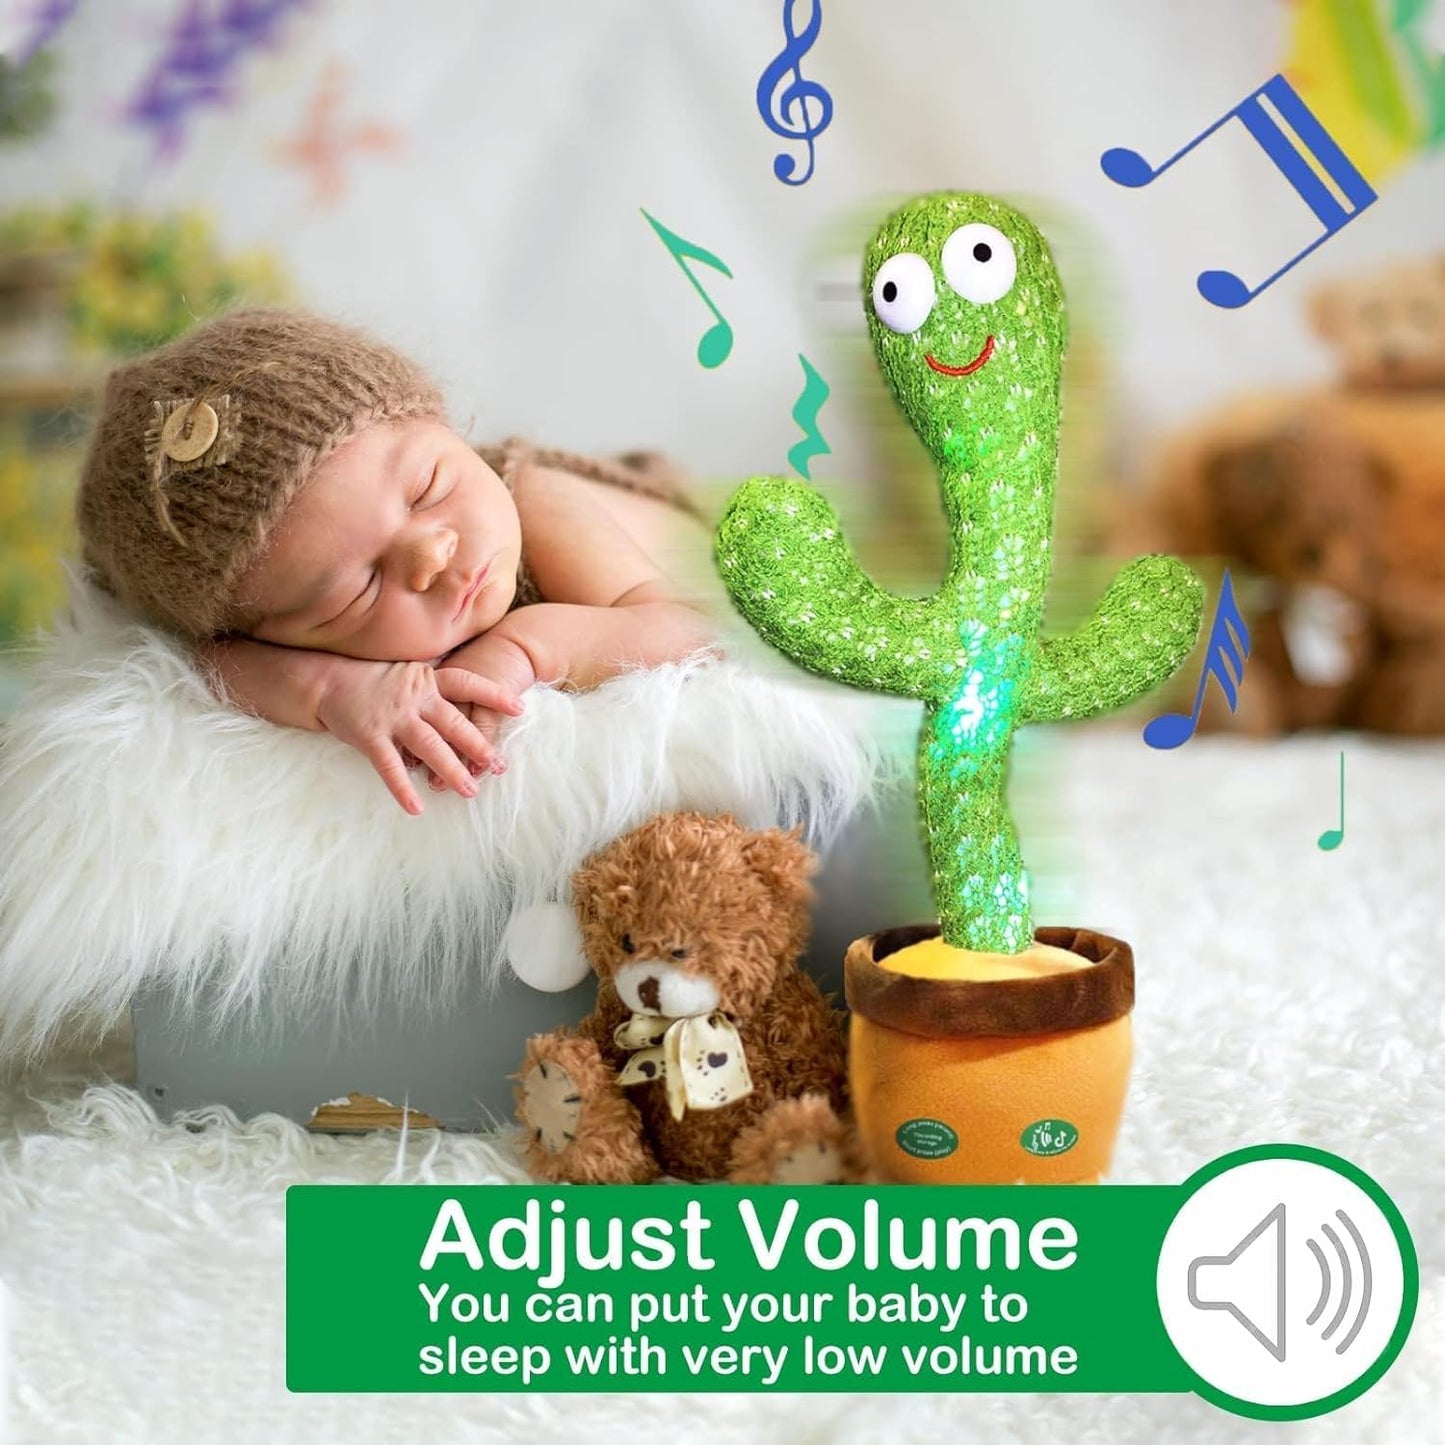 Pbooo Dancing Cactus Mimicking Toy,Talking Repeat Singing Sunny Cactus Toy 120 Pcs Songs for Baby 15S Record Your Sound Sing+Dancing+Recording+LED